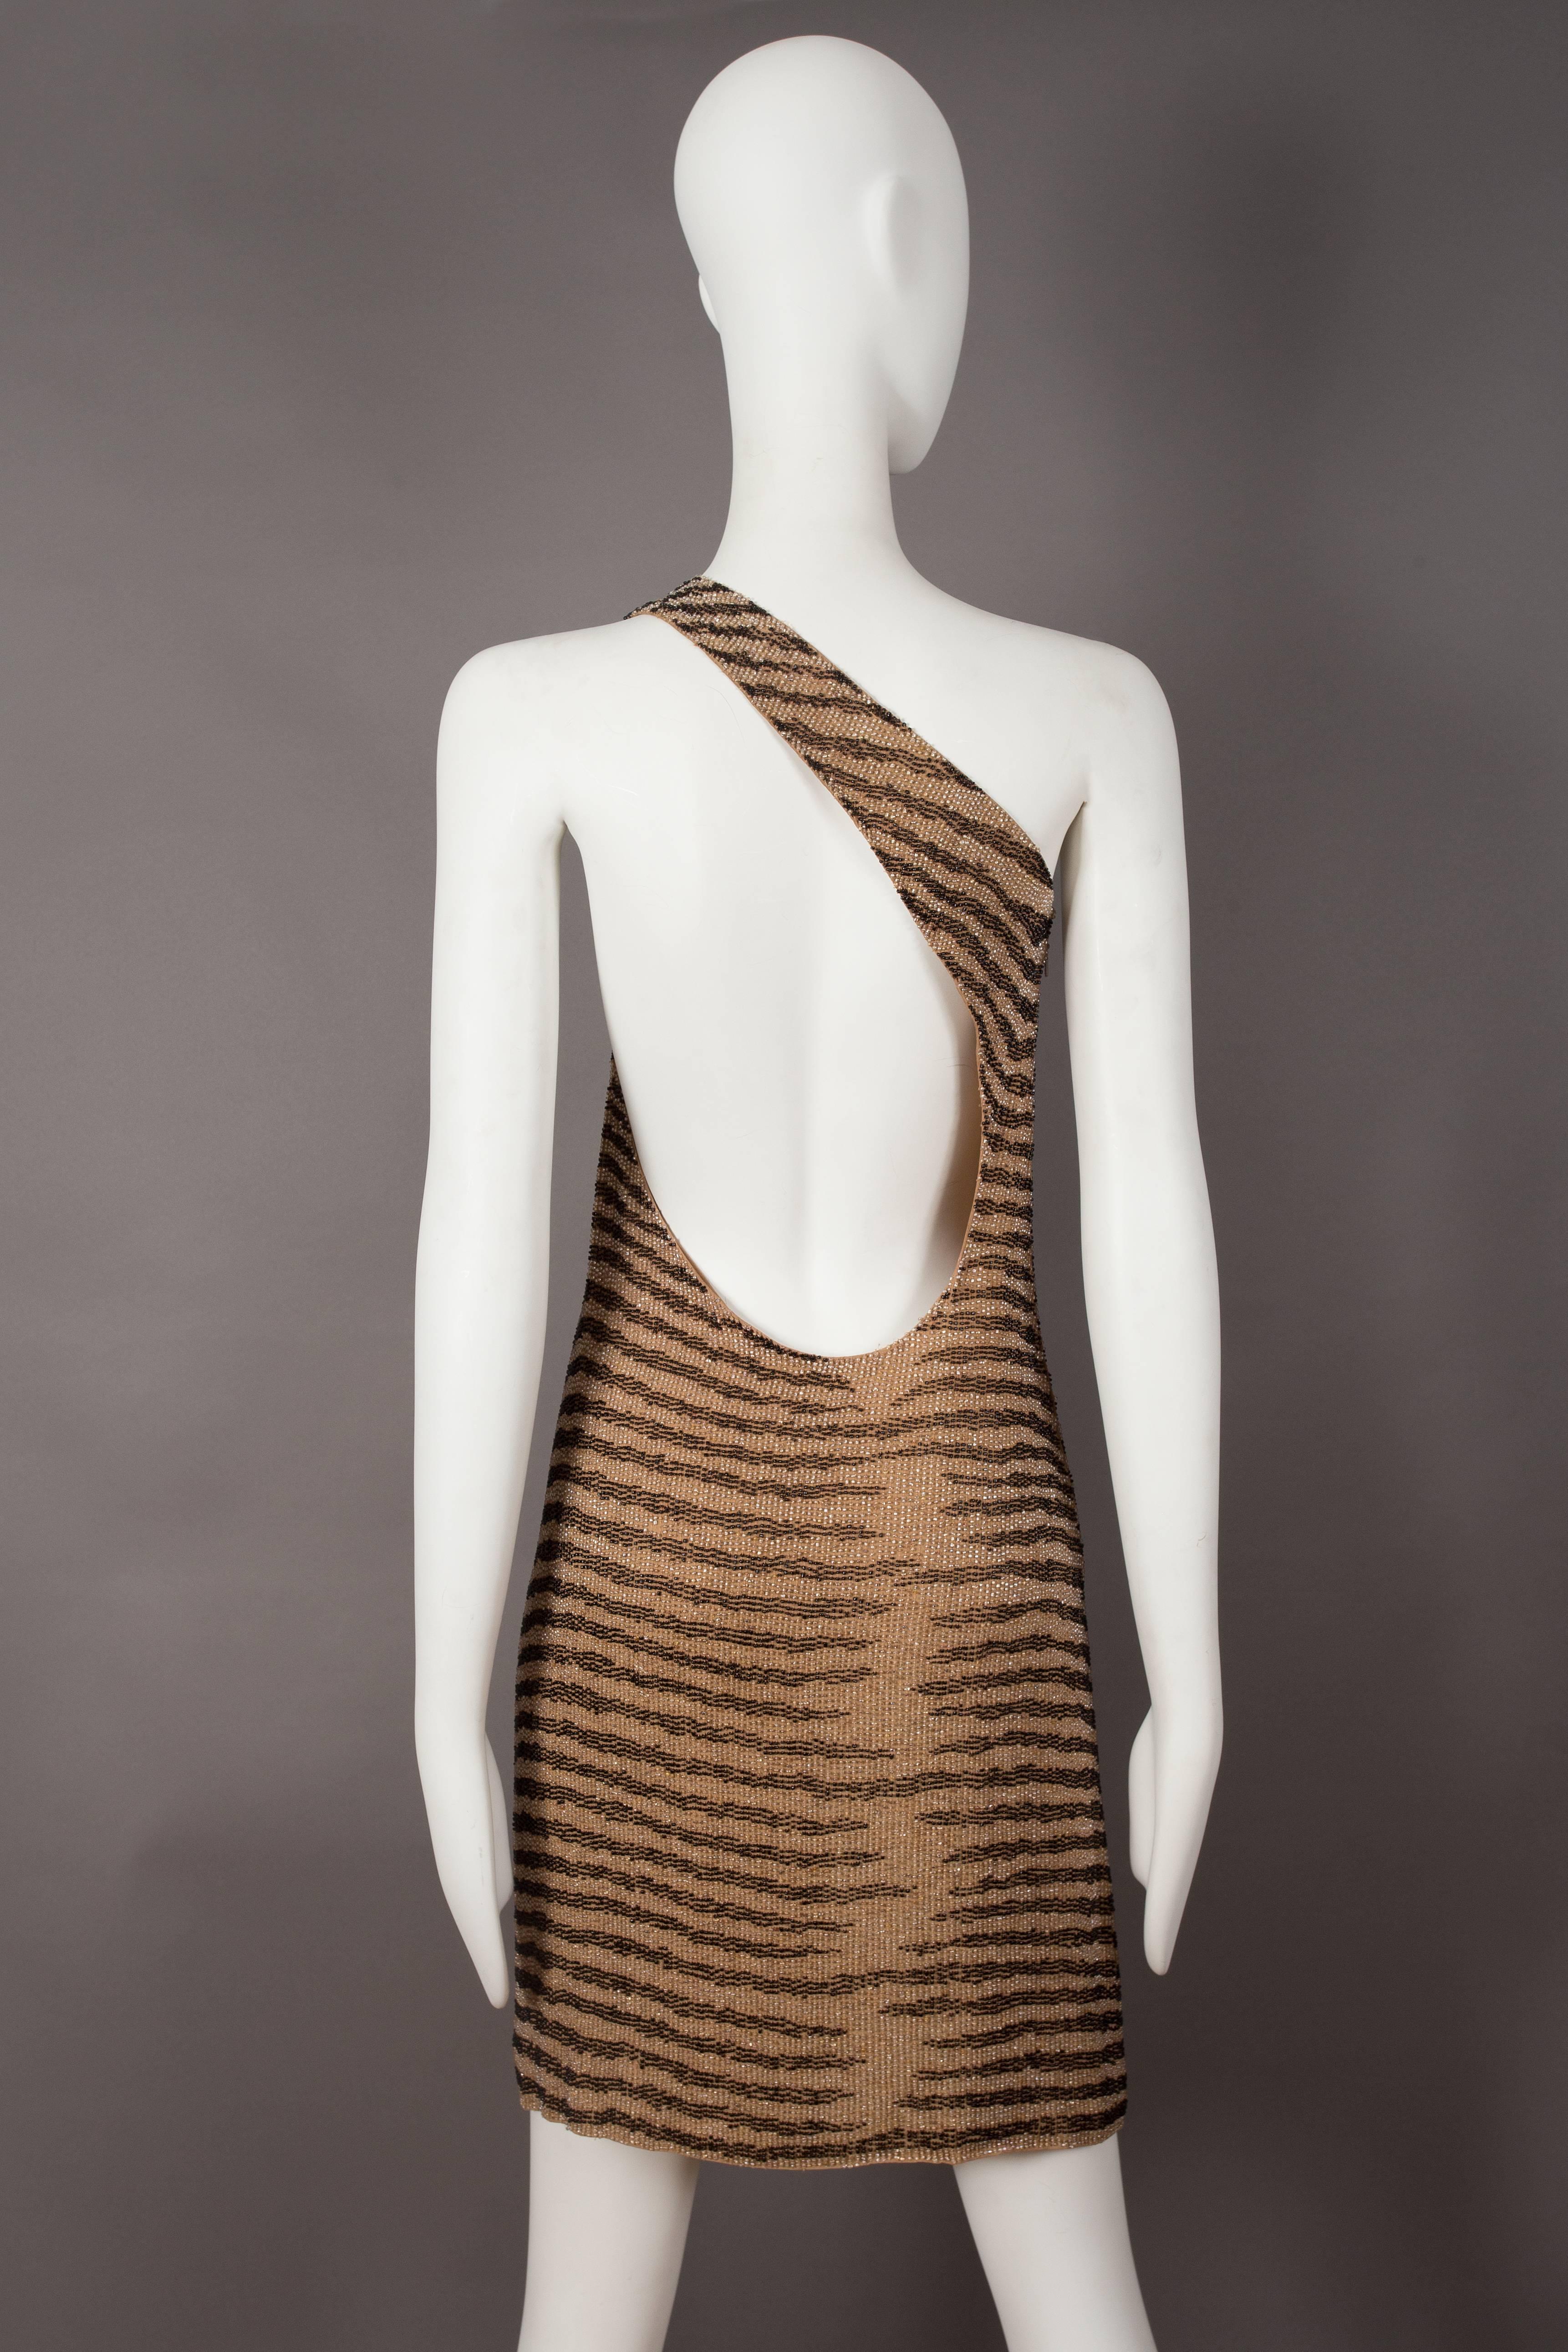 A rare Tom Ford for Gucci evening dress, spring-summer 2000. 

Fully beaded design in zebra print, silk-chiffon lining, invisible zip closure at the side seam and circular cut out at the rear. 